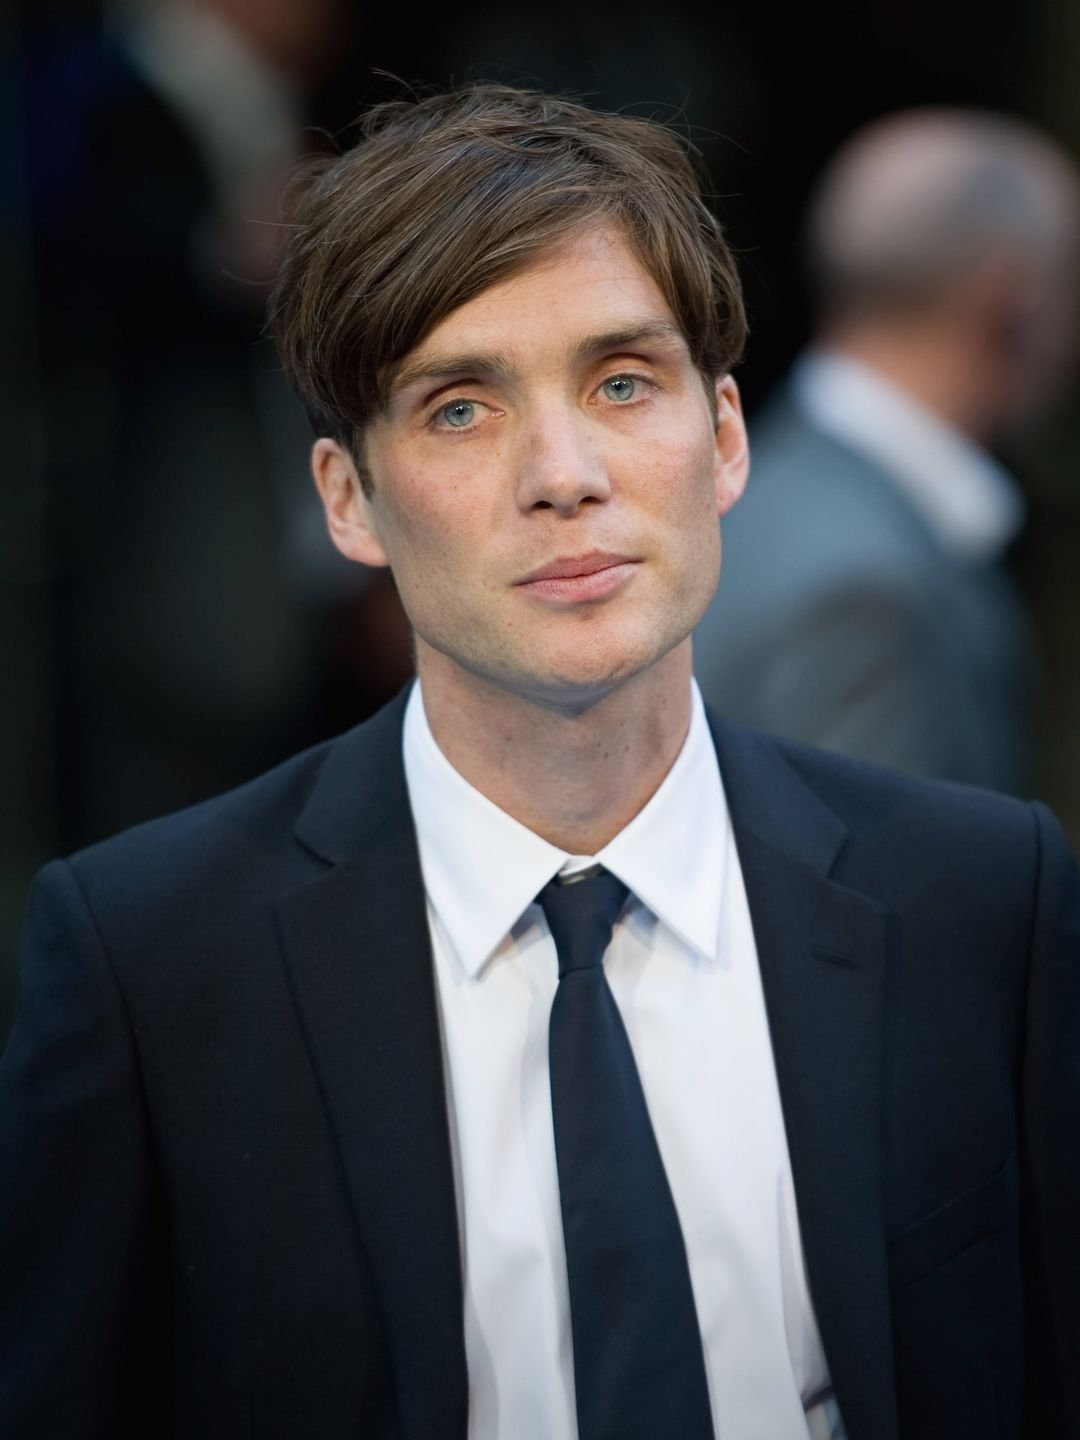 Cillian Murphy who are his parents